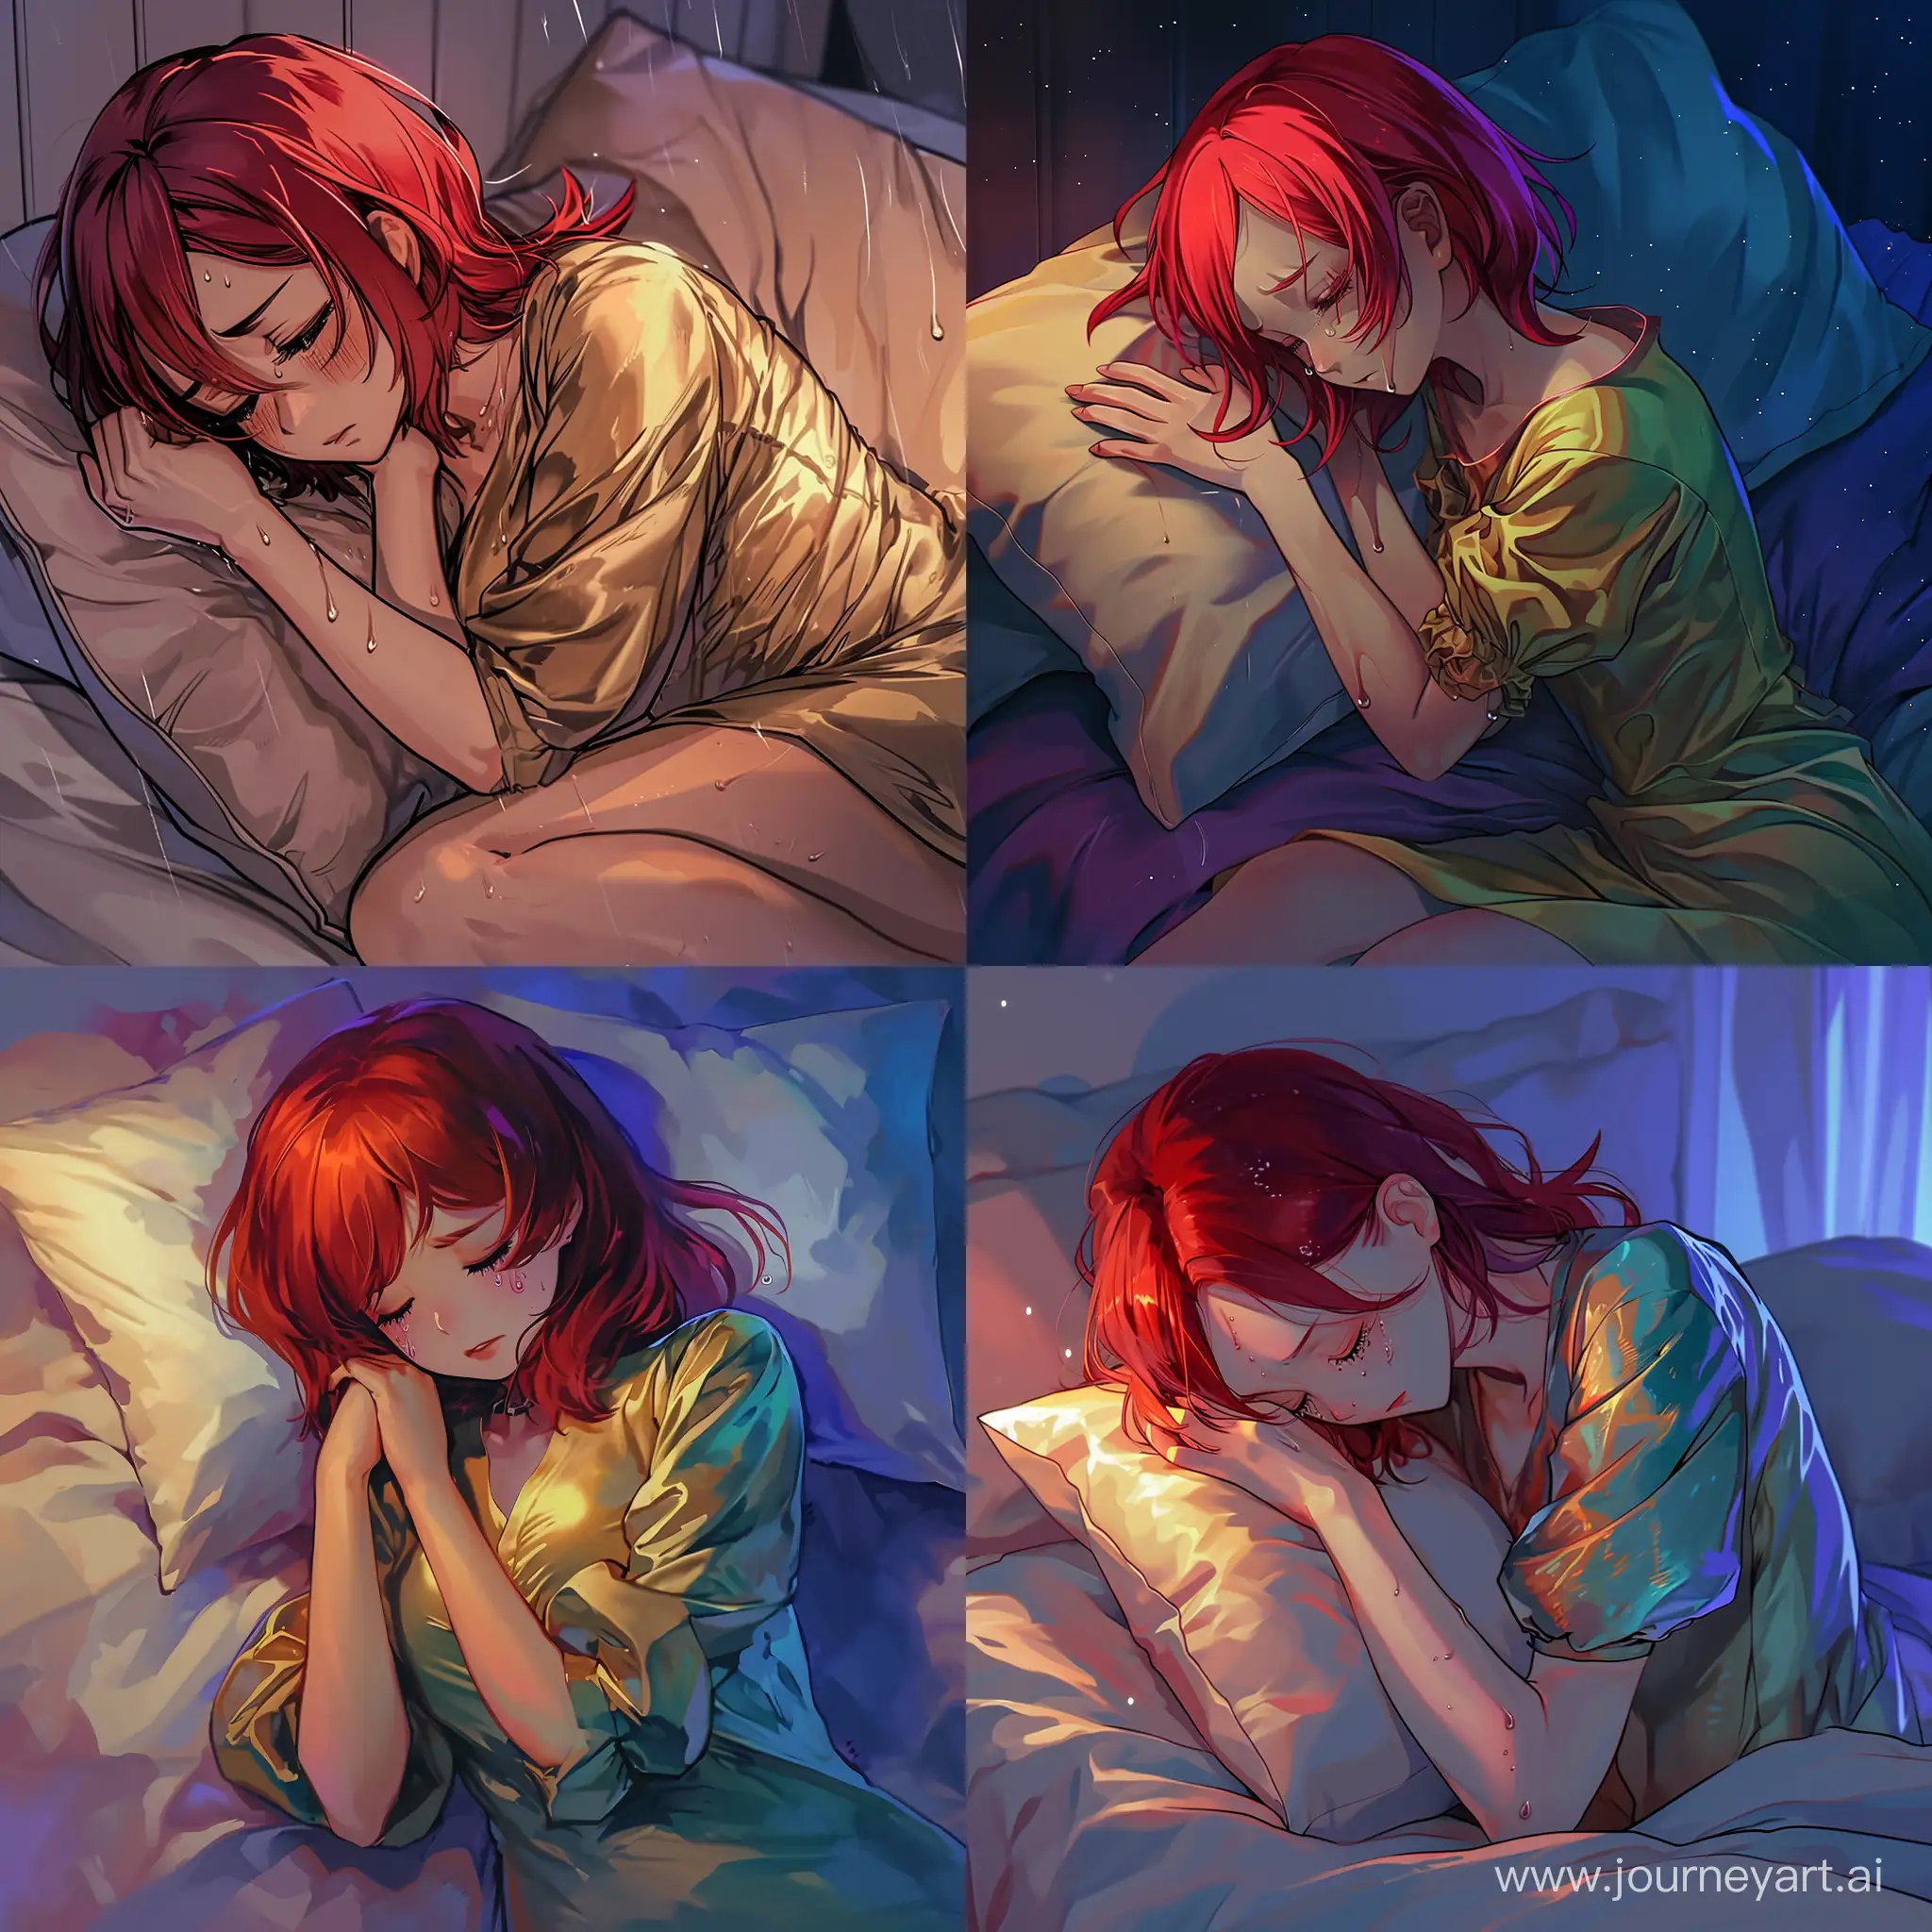 Melancholic-Night-RedHaired-Woman-Embracing-Solitude-in-AnimeStyle-Scene